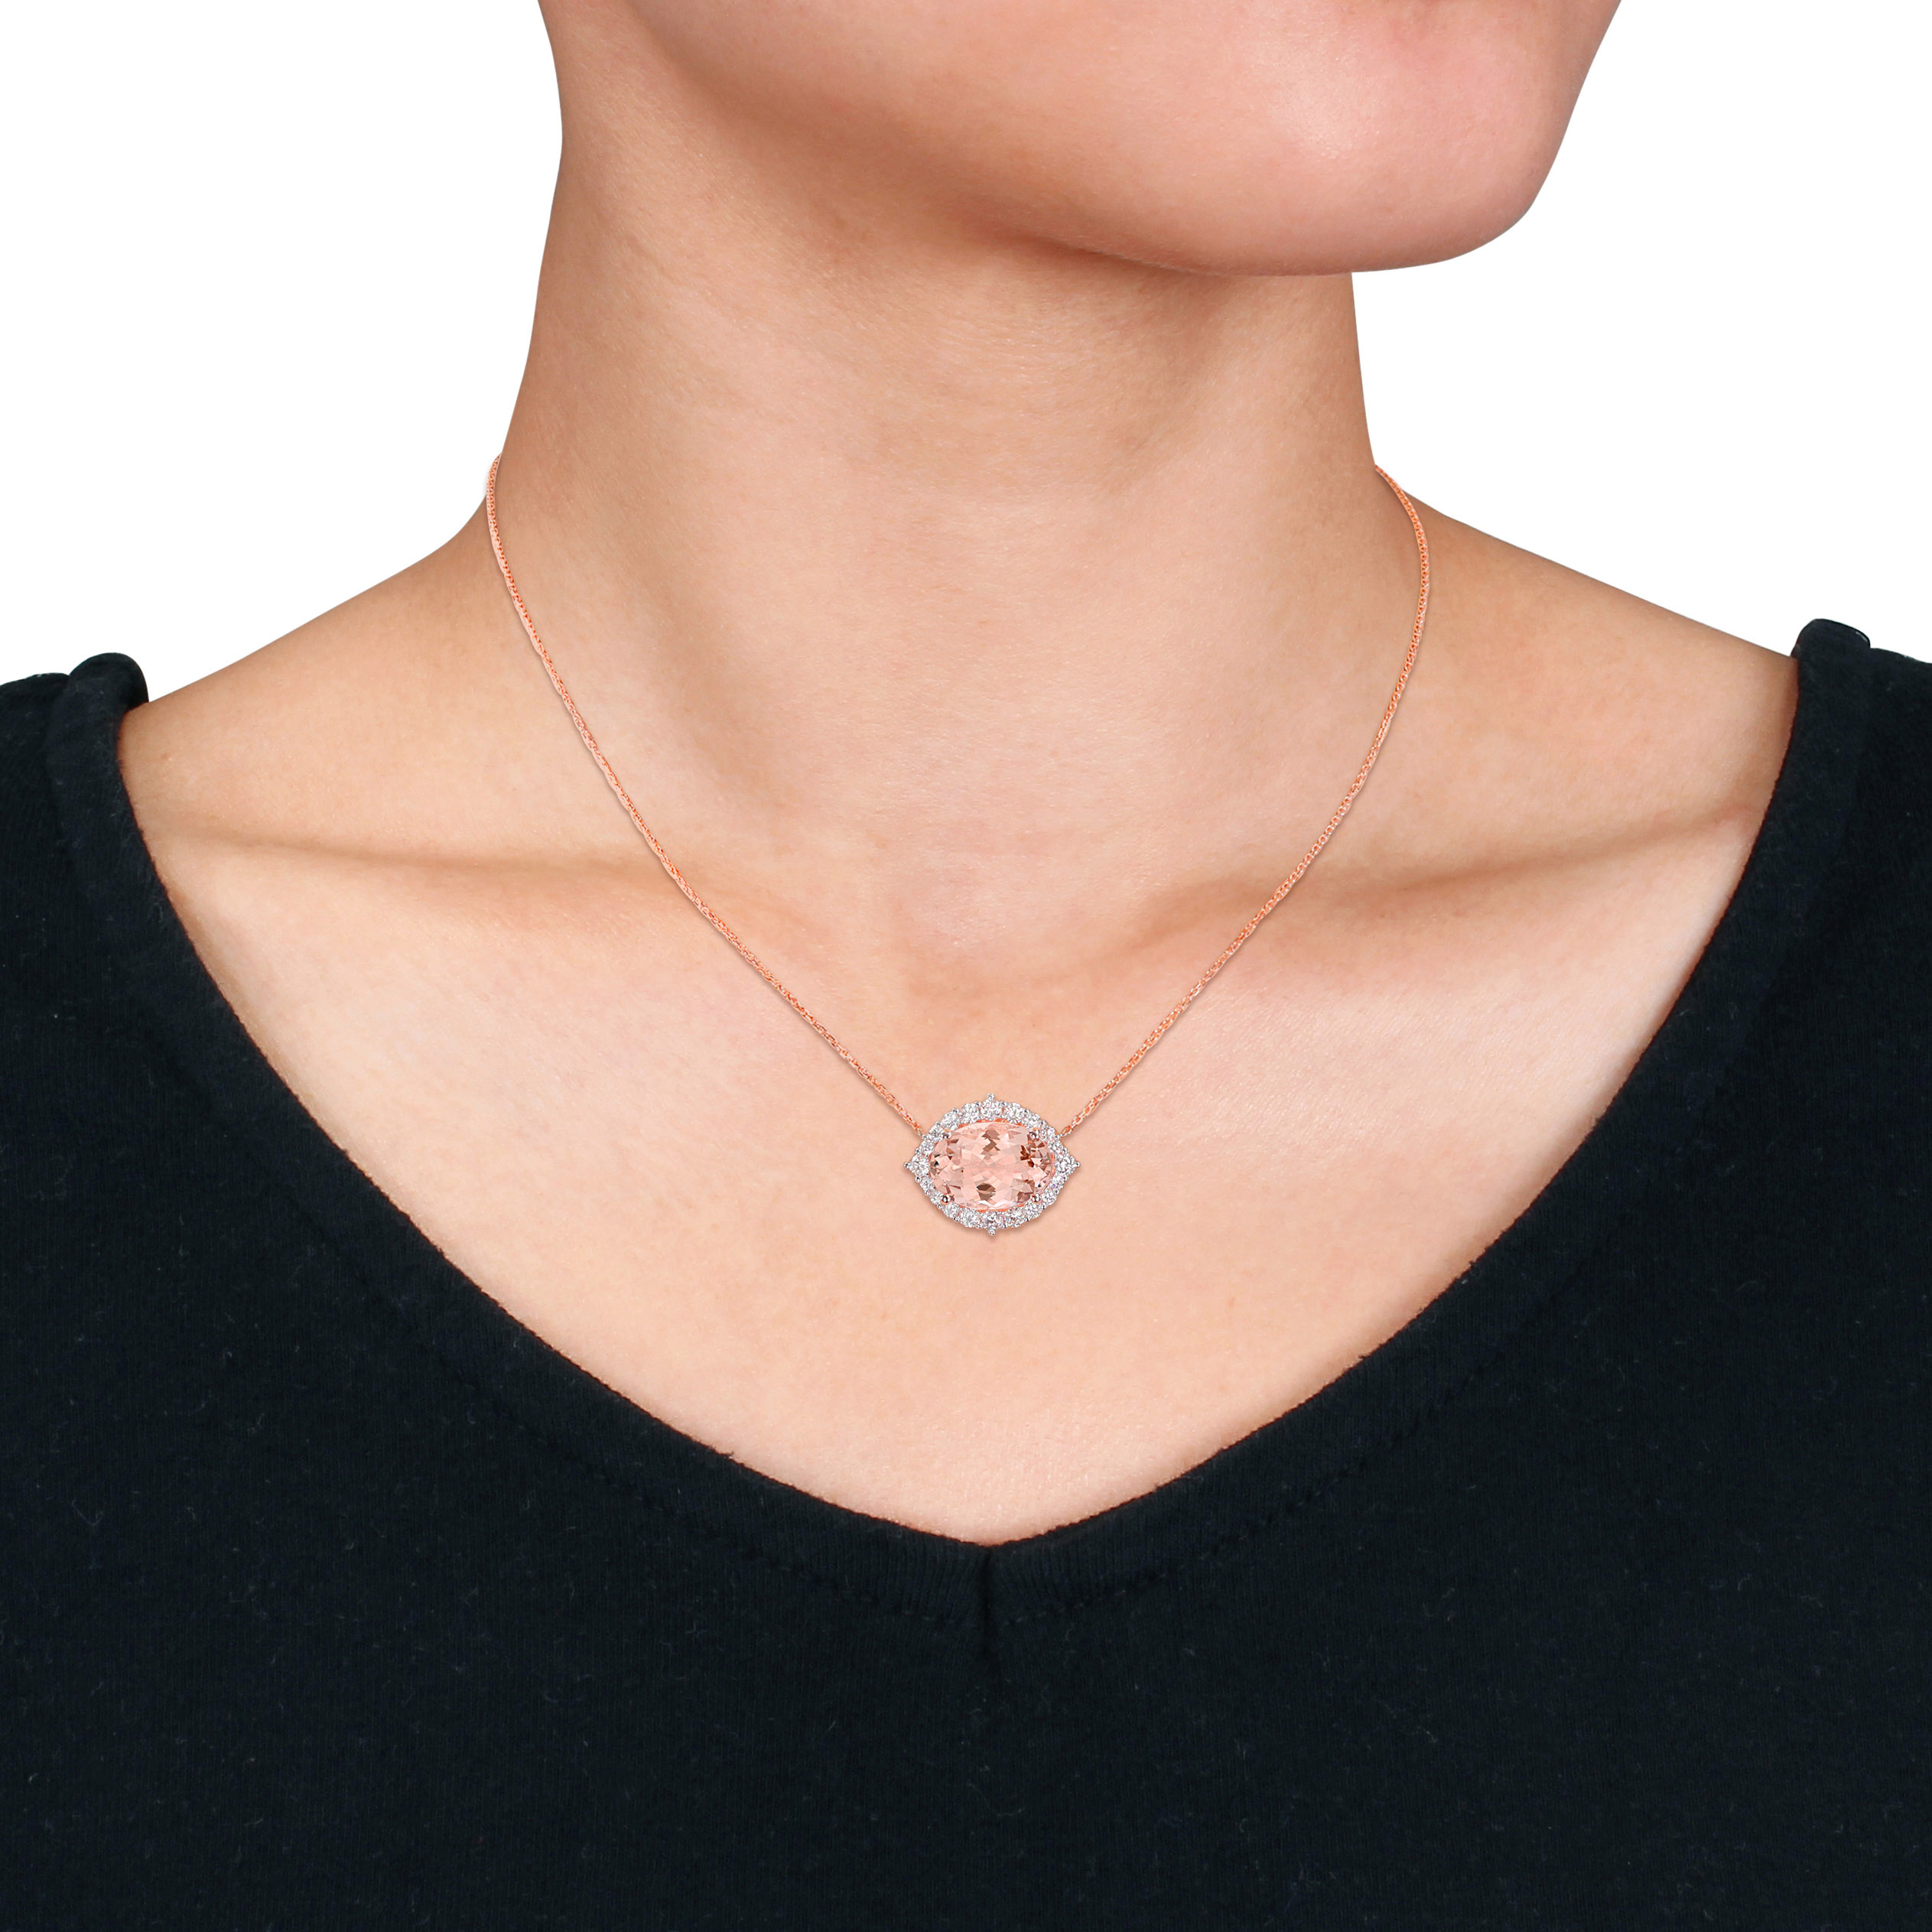 4 4/5 CT TGW Oval-Cut Morganite and 4/5 CT TDW Diamond Halo Necklace in 14k Rose Gold - 17 in.